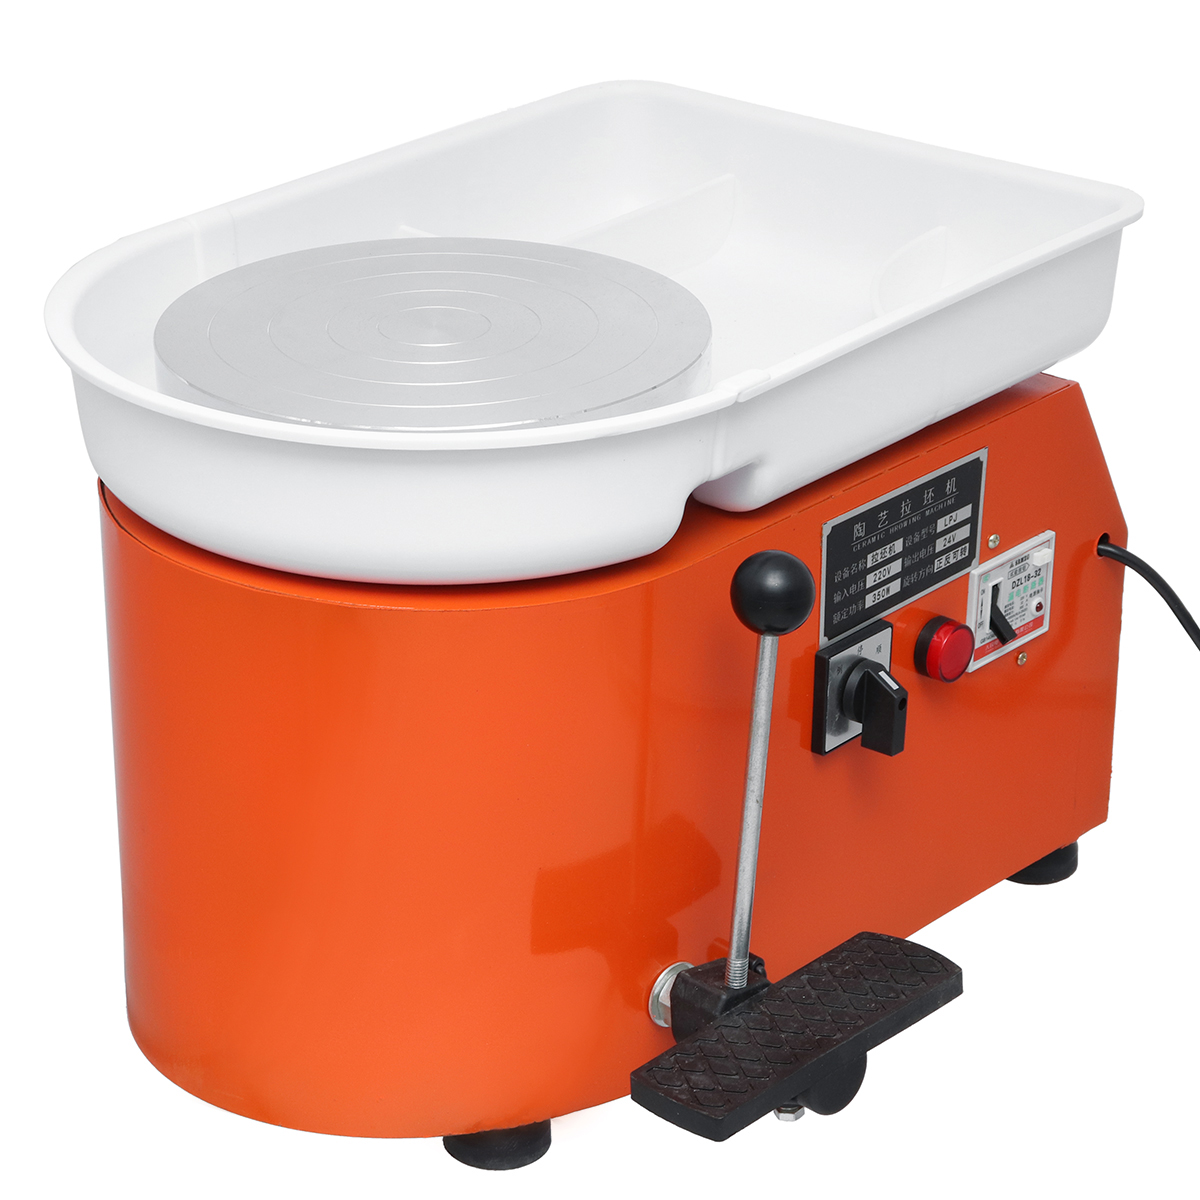 

Pottery Forming Machine 250W Electric Pottery Wheel DIY Clay Tool with Tray for Ceramic Machine